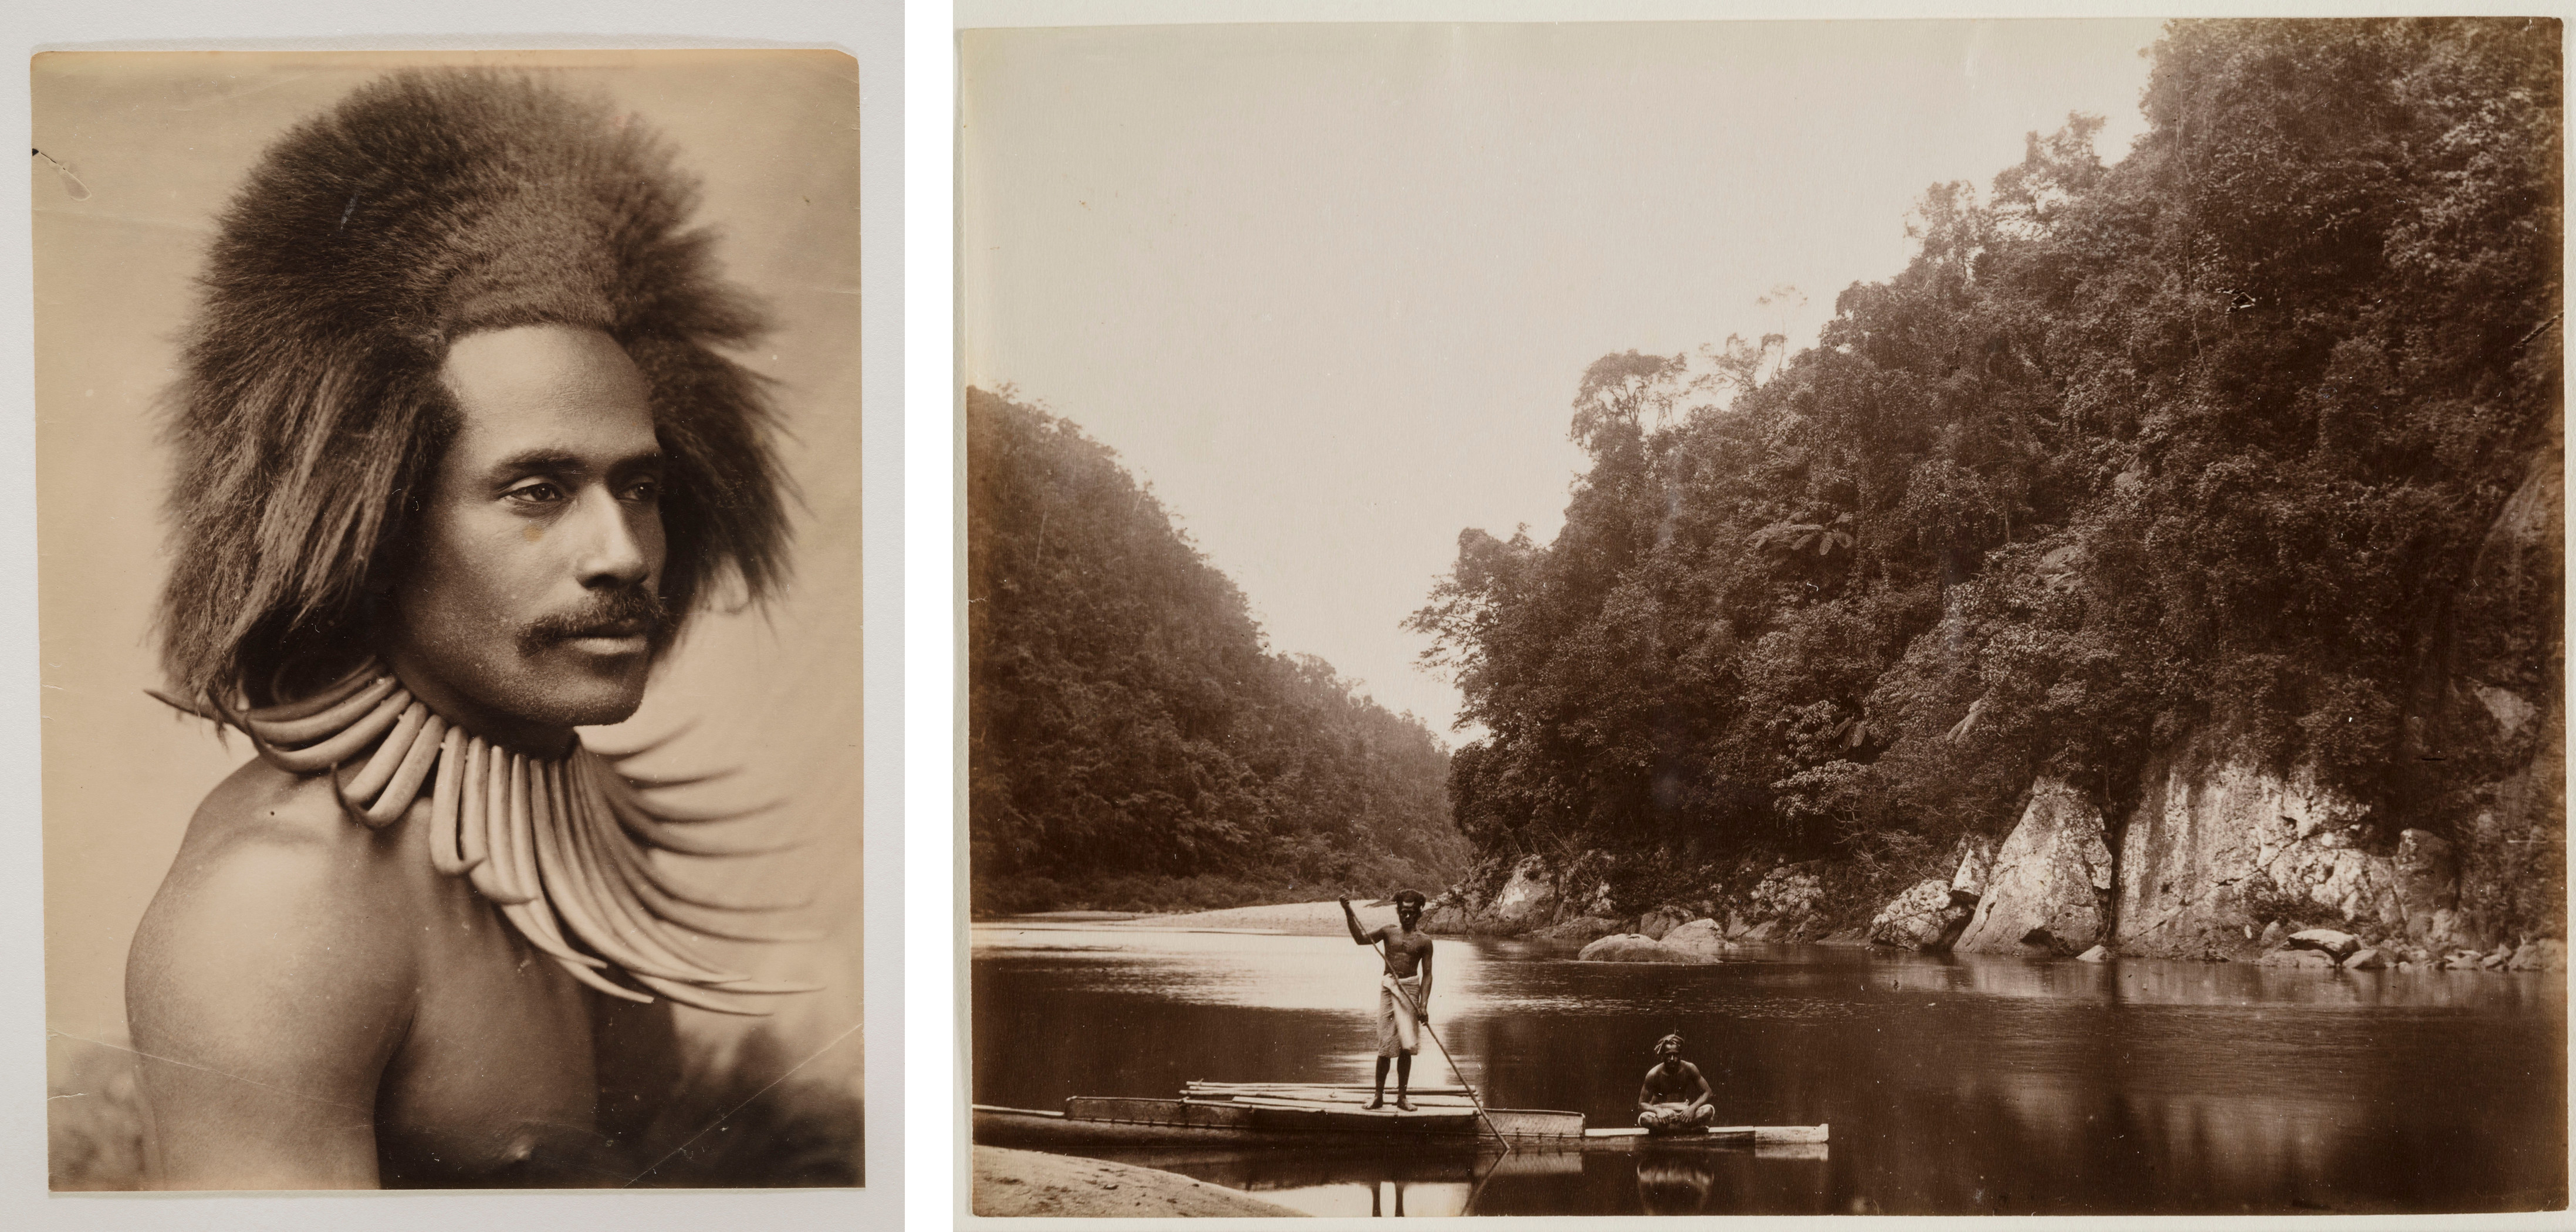 Left: Image of a Fijian Warrior wearing a Whale Tooth Necklace from the 1880s; Right: Image of two Fijians in Navua River Scene